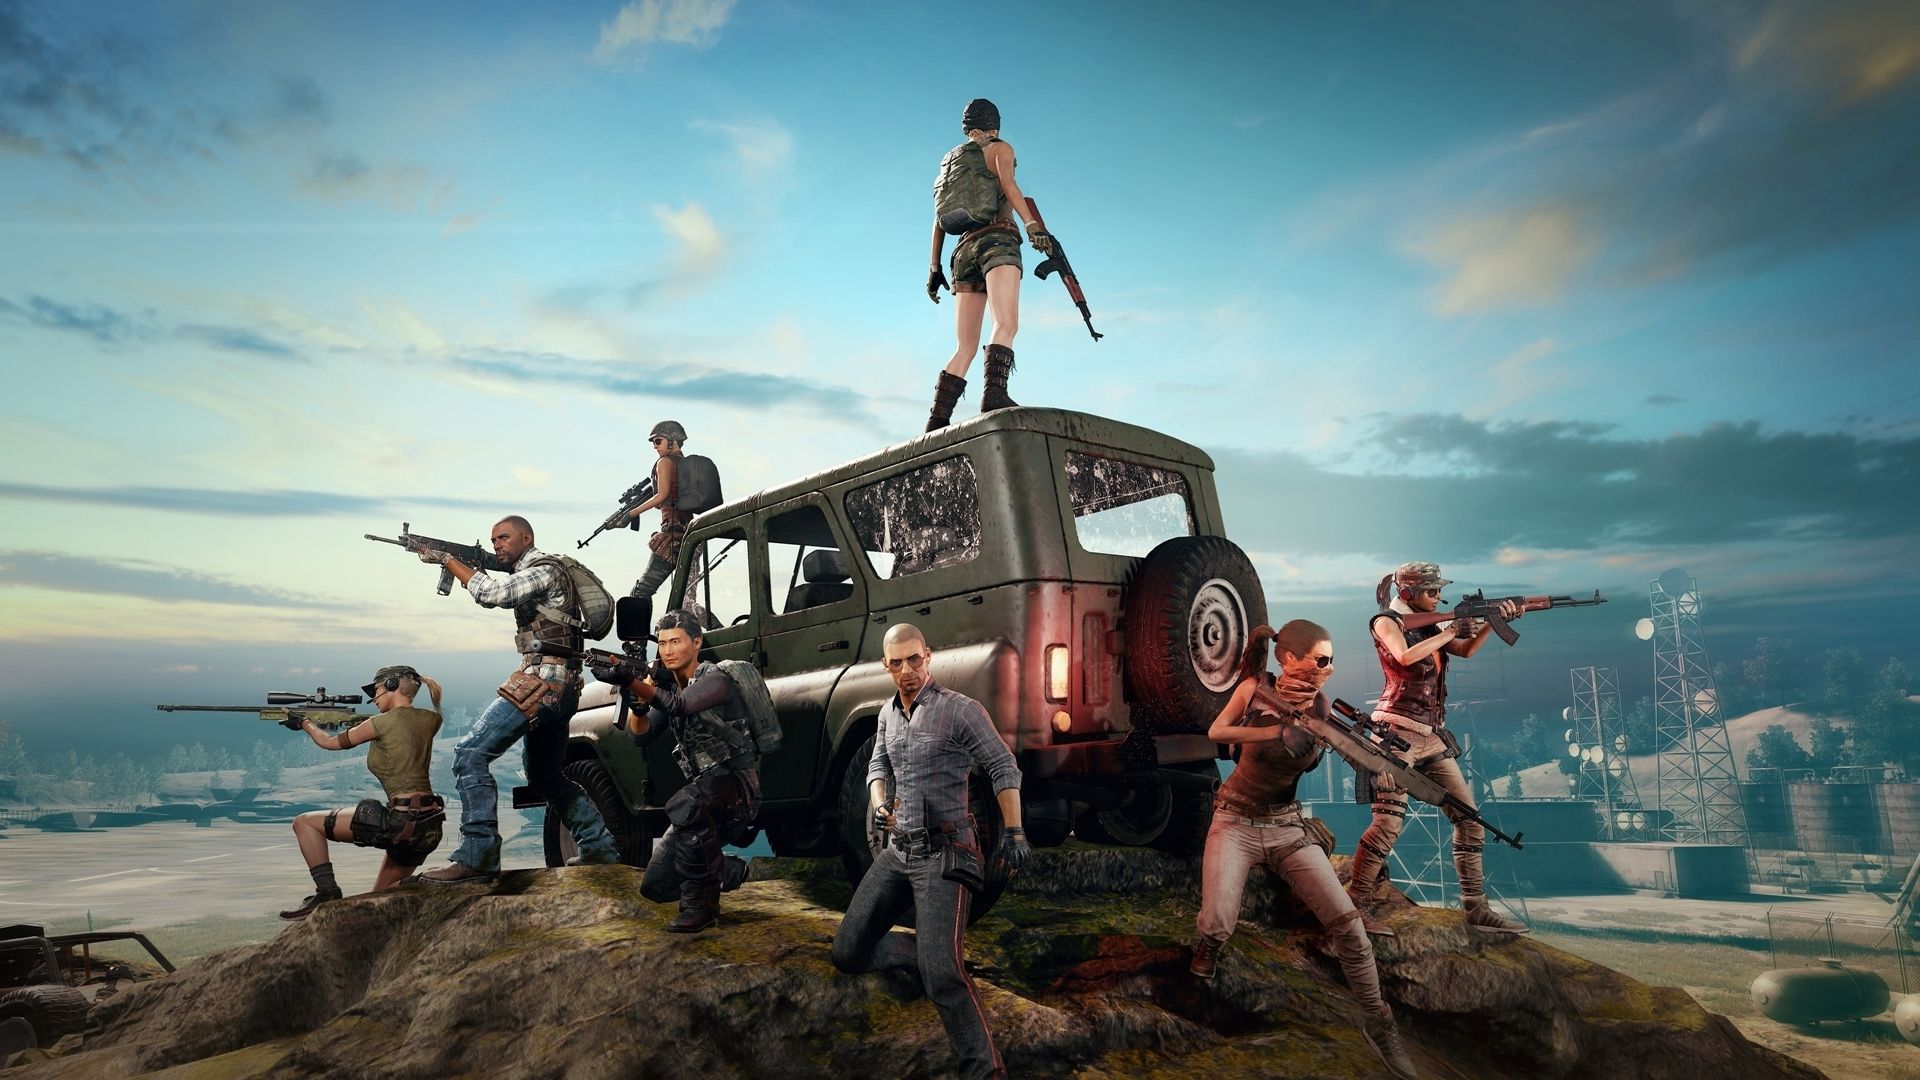 Best mobile shooters: PUBG Mobile. Image shows a series of characters in military and combat outfits, standing around a jeep holding weapons.